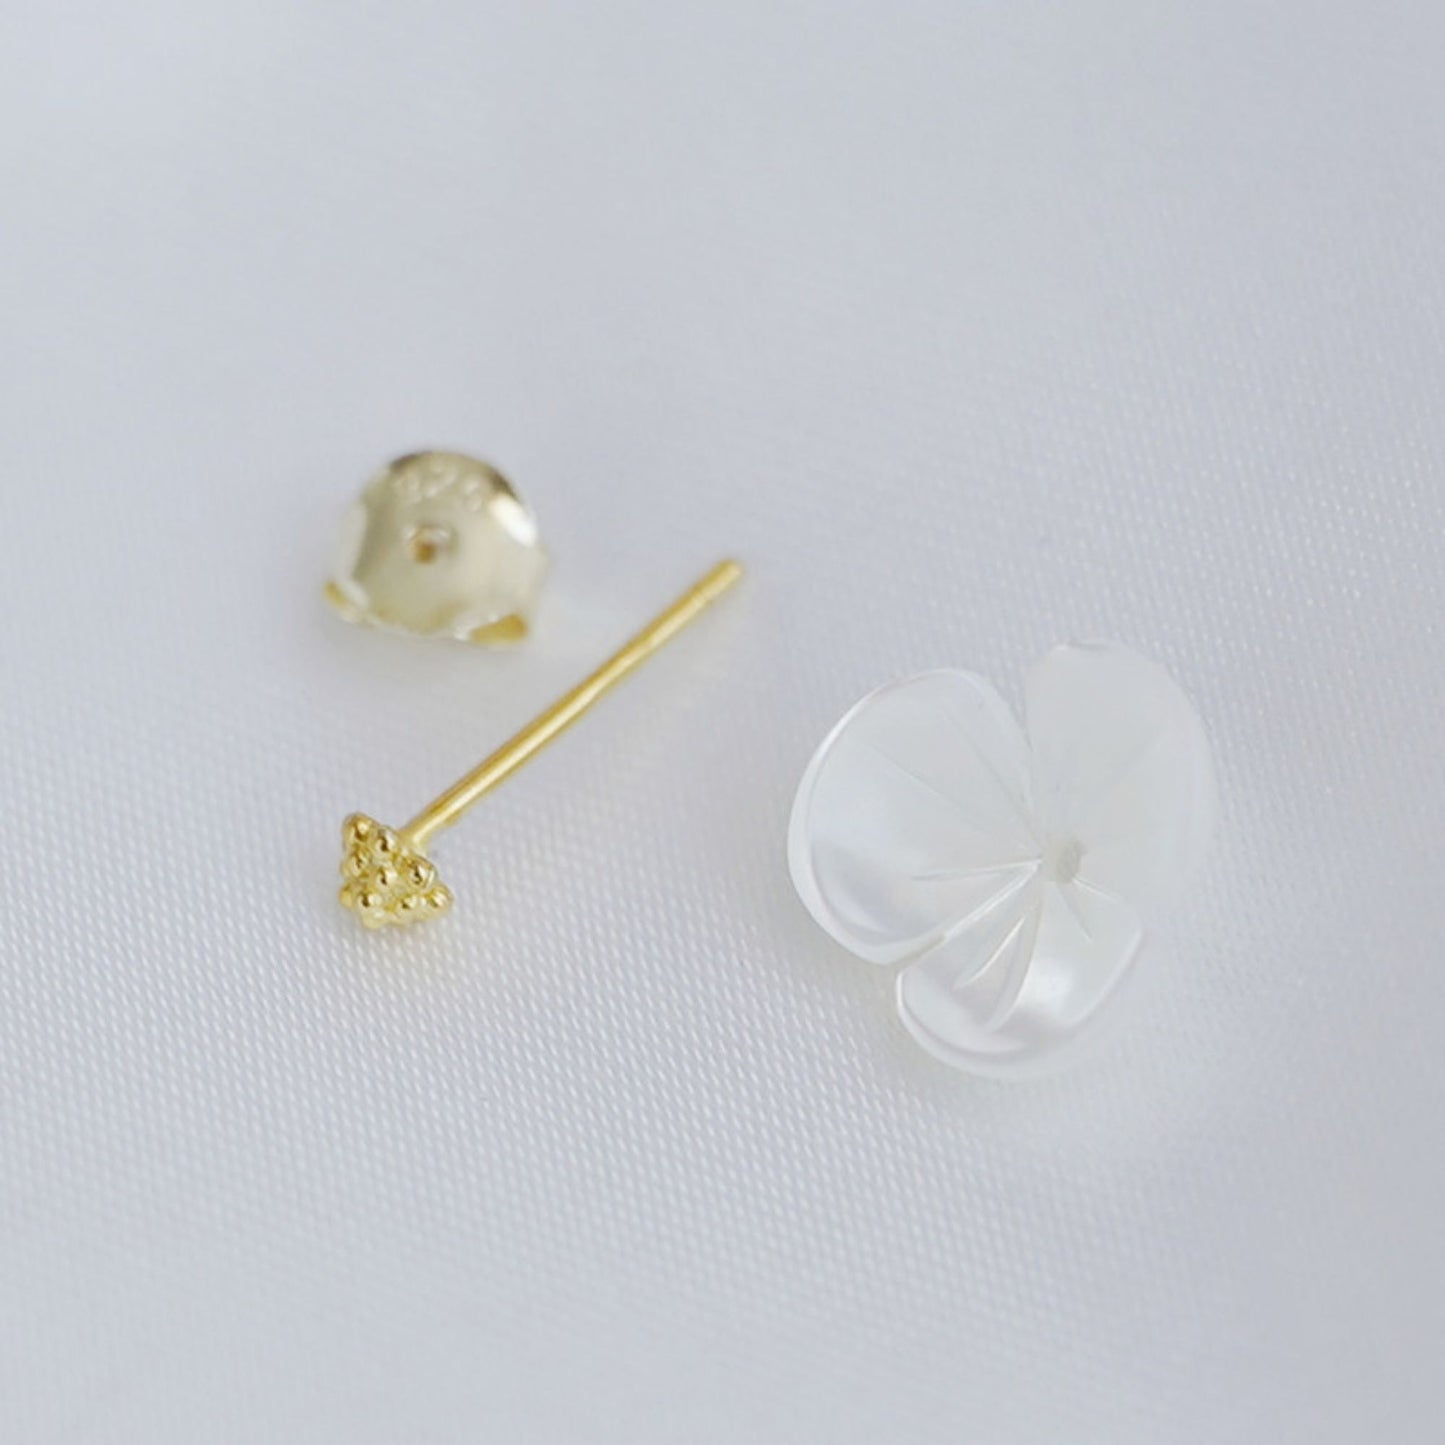 18K Gold Sterling Silver Clover Flower Stud Earrings with Natural Mother of Pearl - sugarkittenlondon